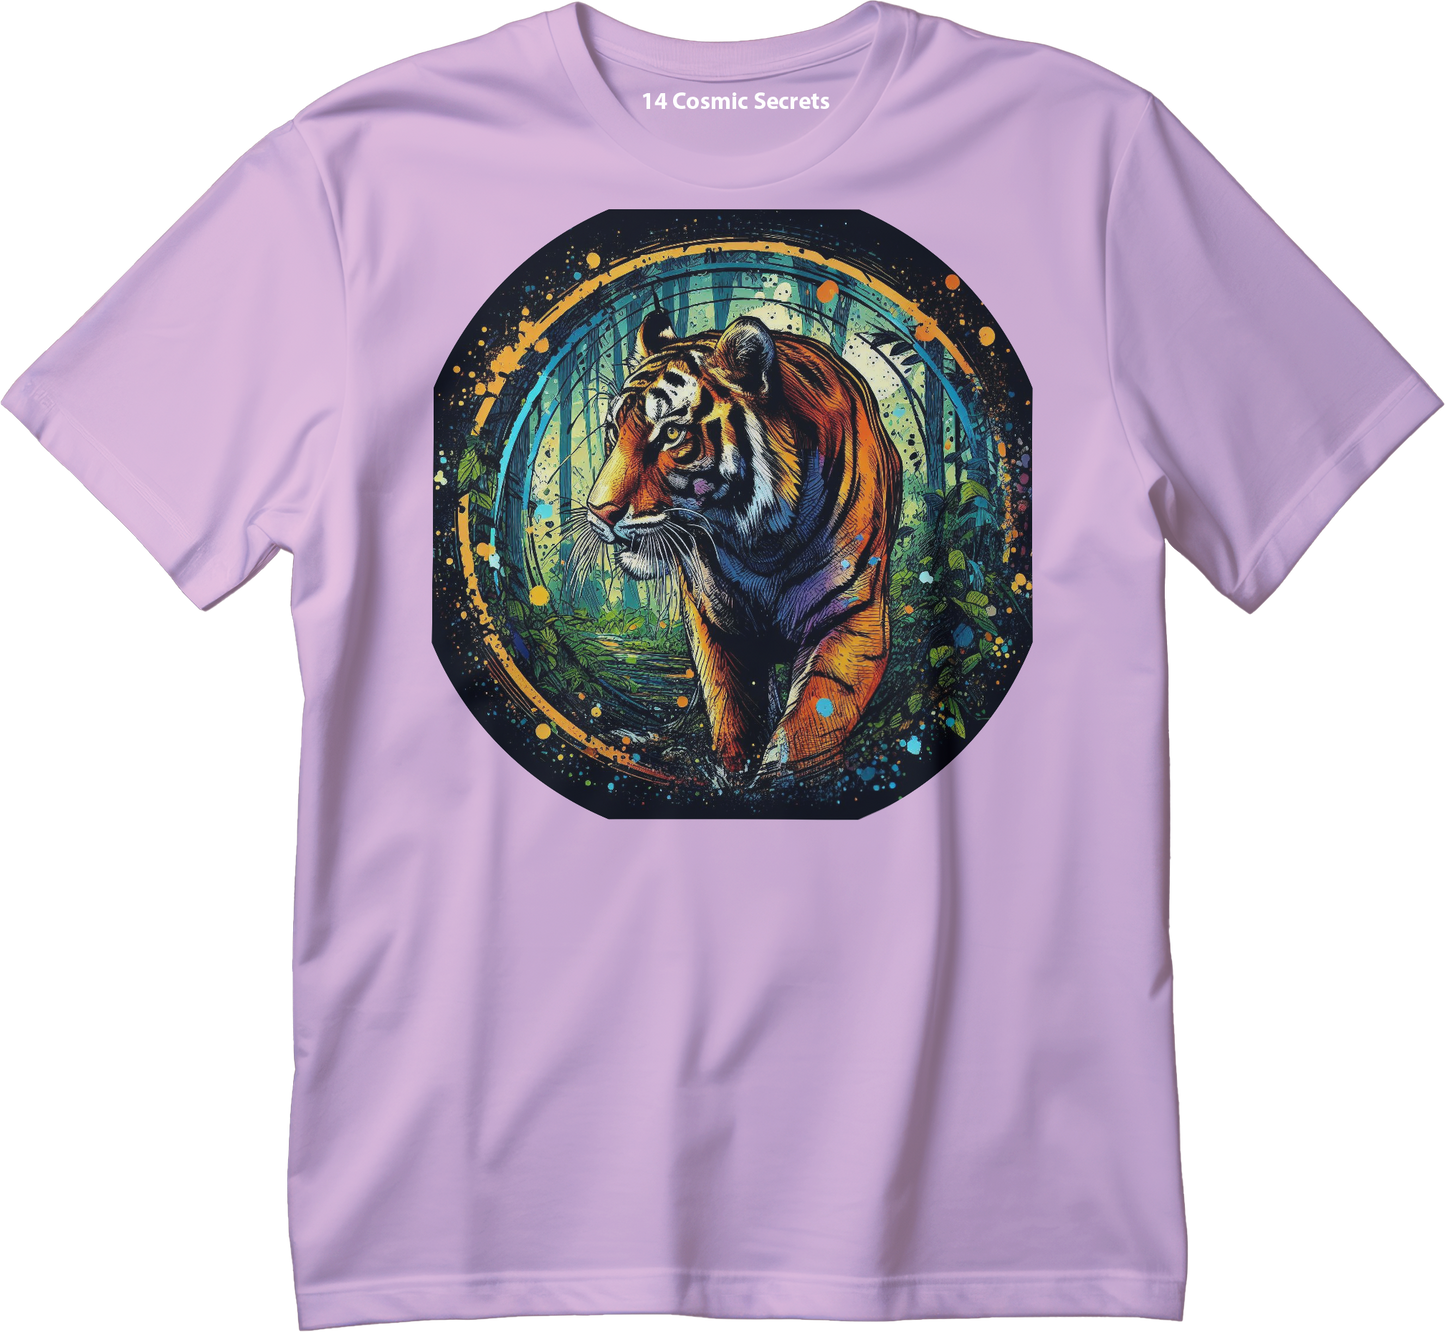 Tiger Kingdom Crest Shirt Graphic Printed T-Shirt  Cotton T-Shirt Magnificence of India T-Shirt